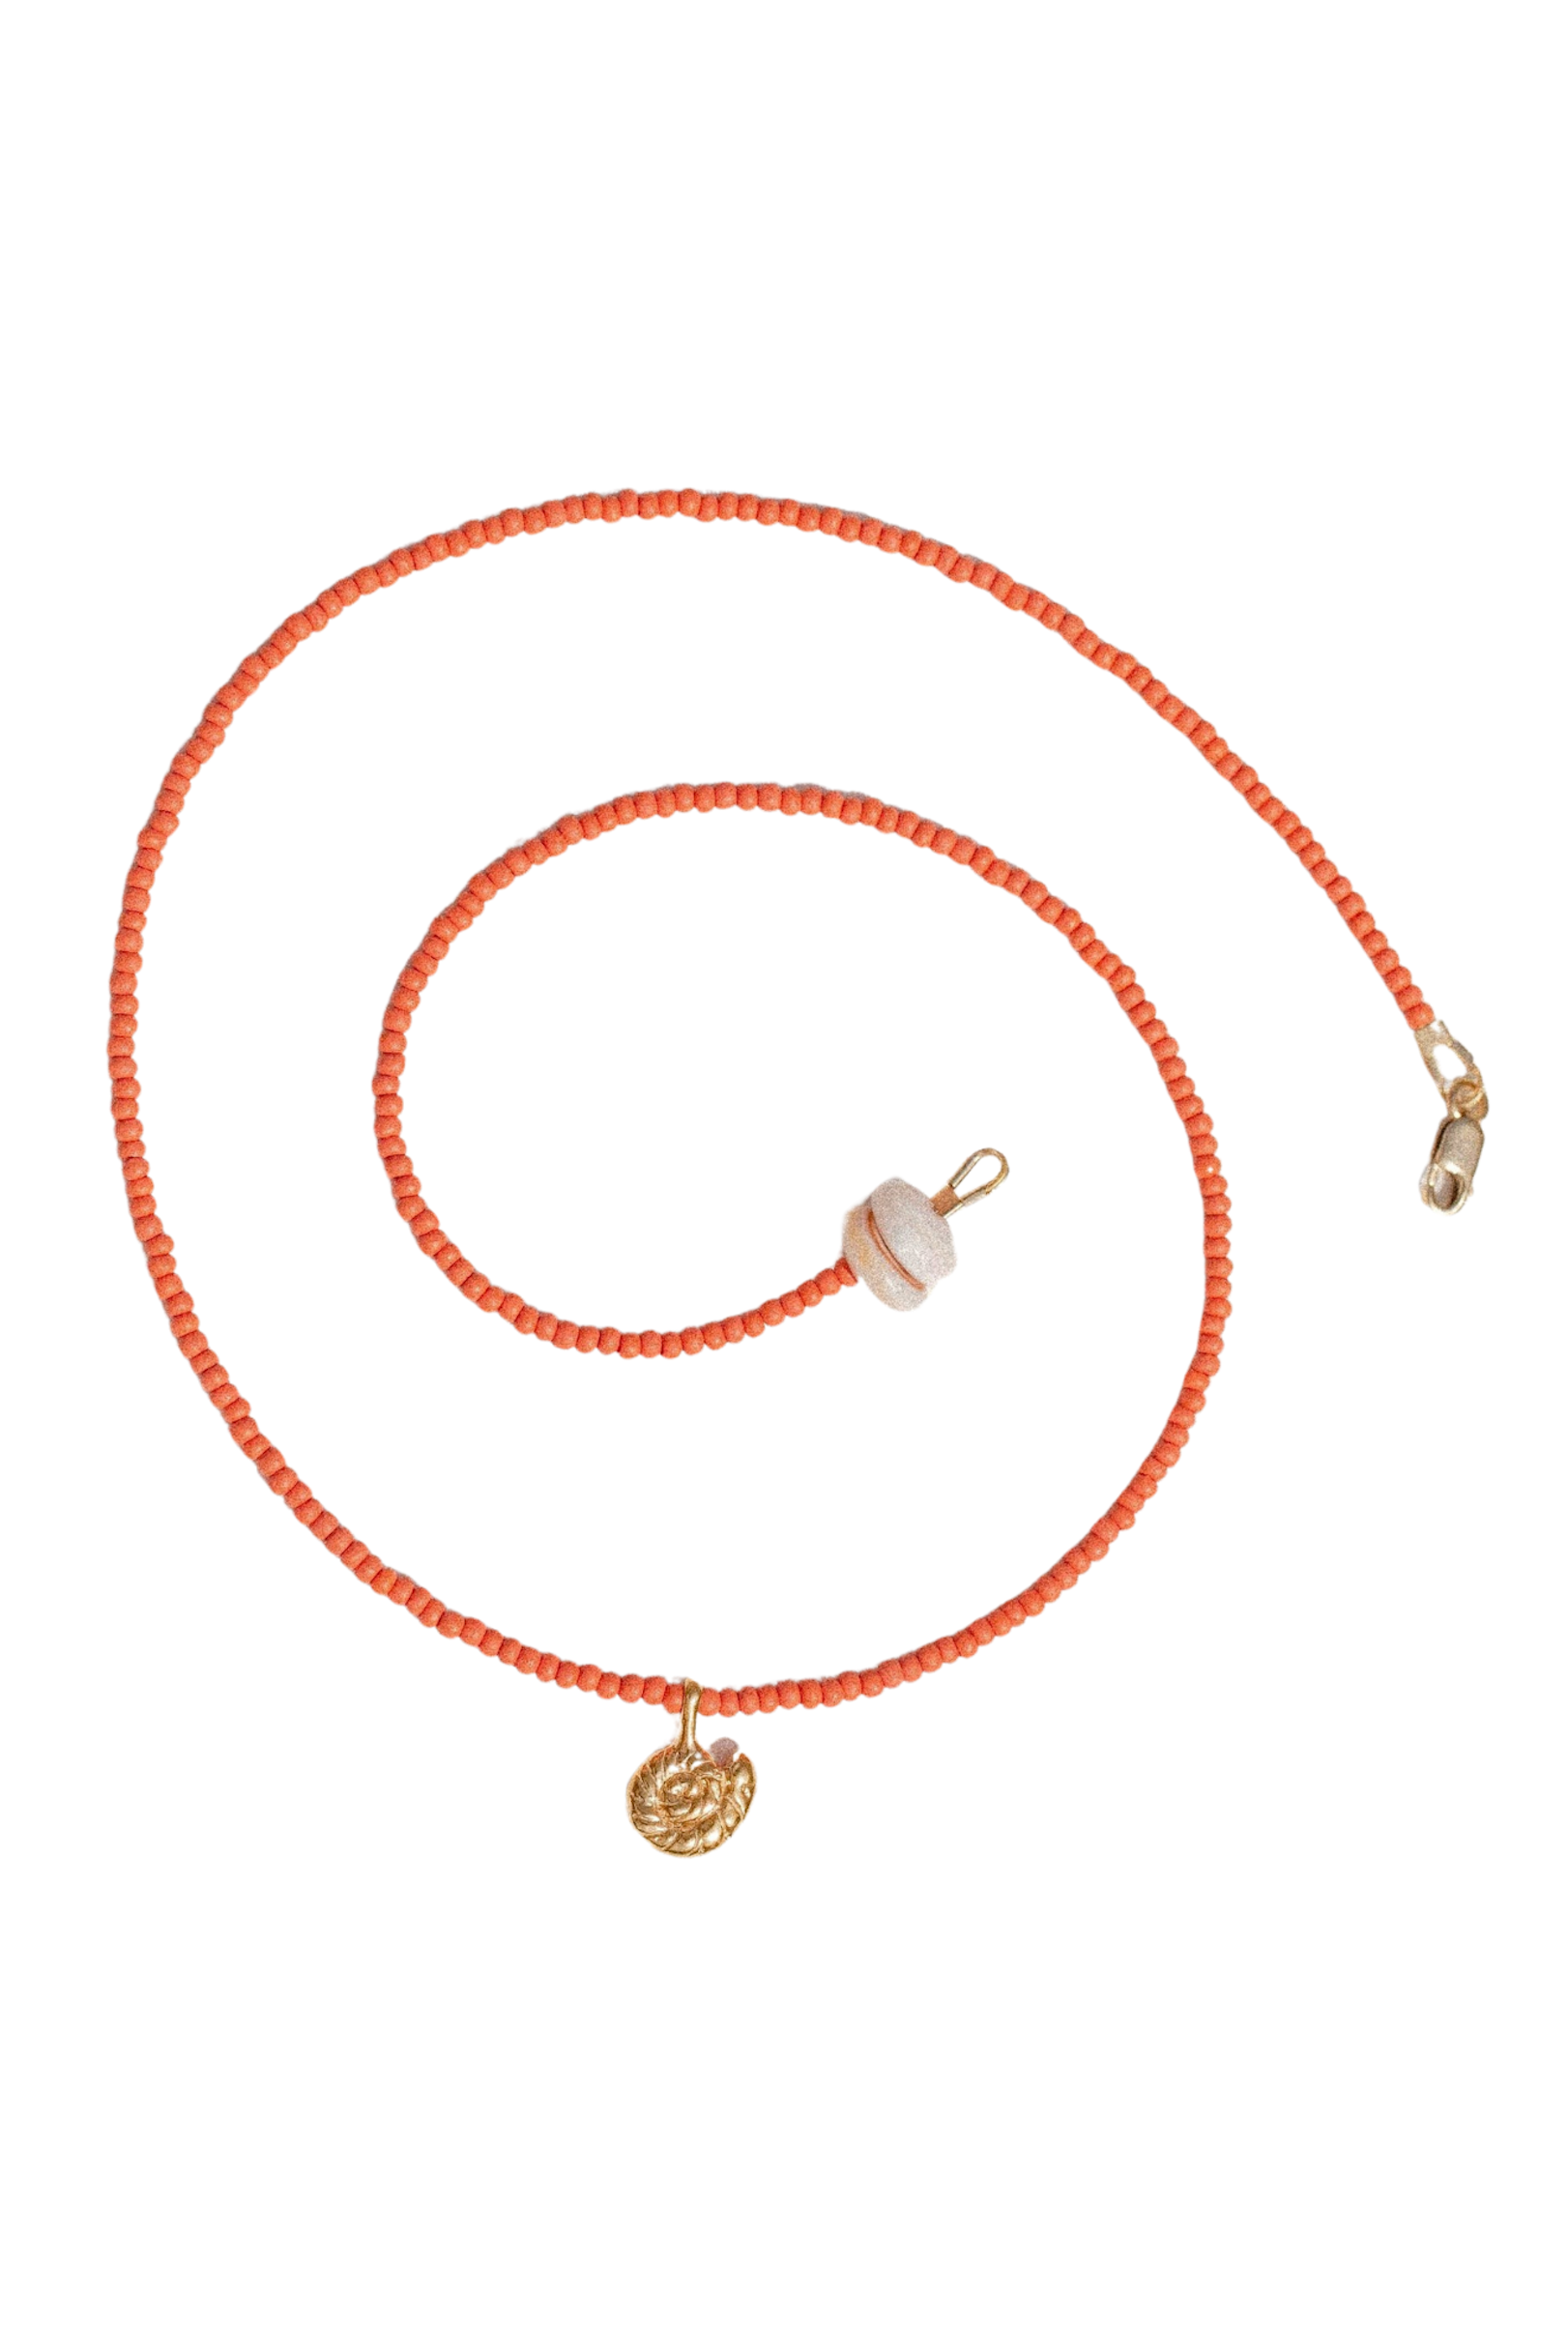 Endless Summer Necklace // Coral